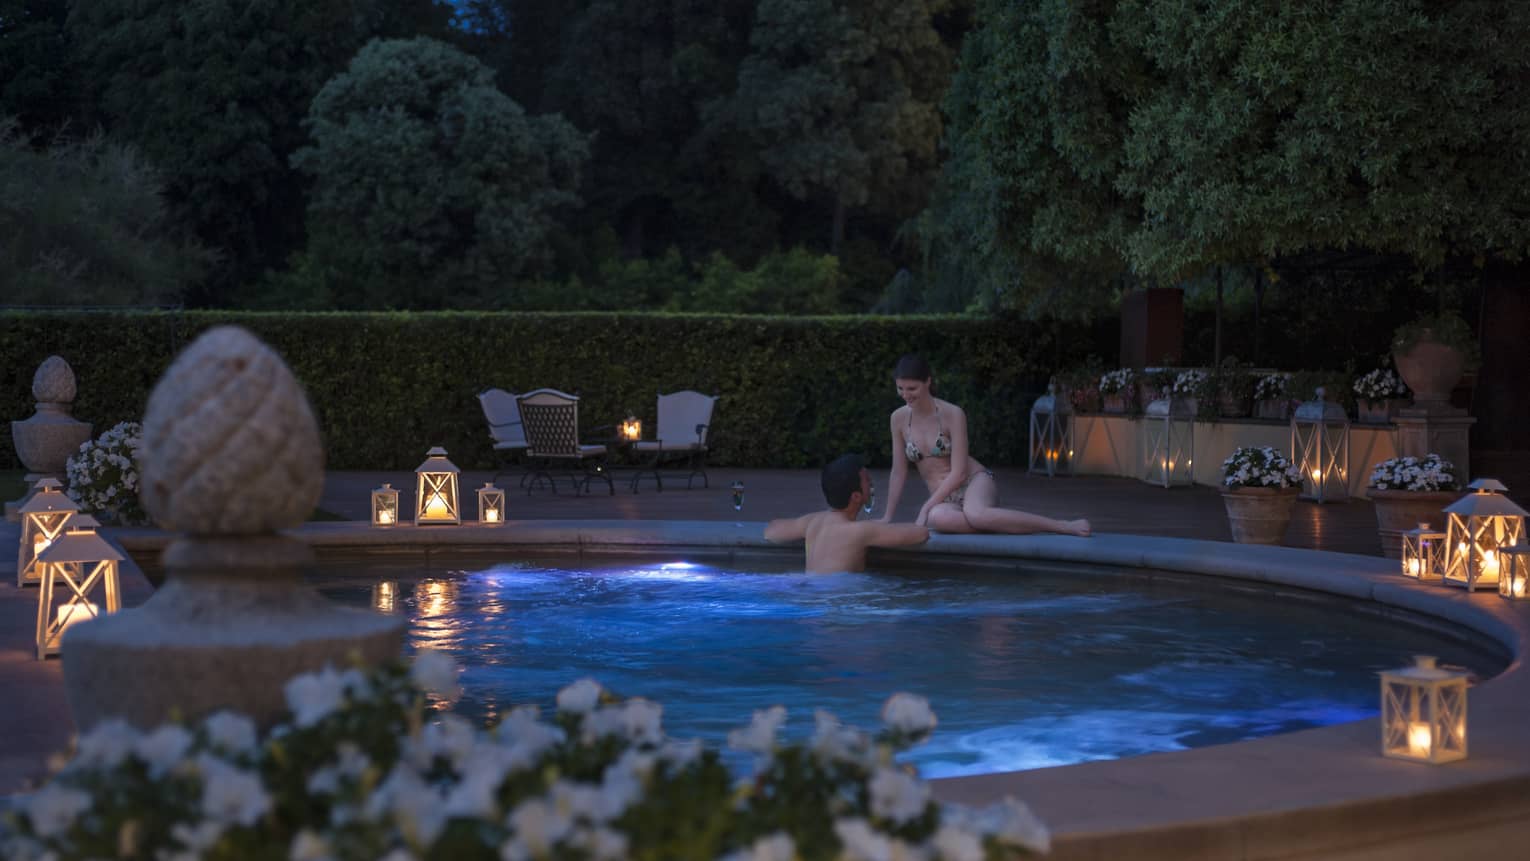 Woman sits on edge of outdoor whirlpool as man wades in water, glowing lanterns on deck